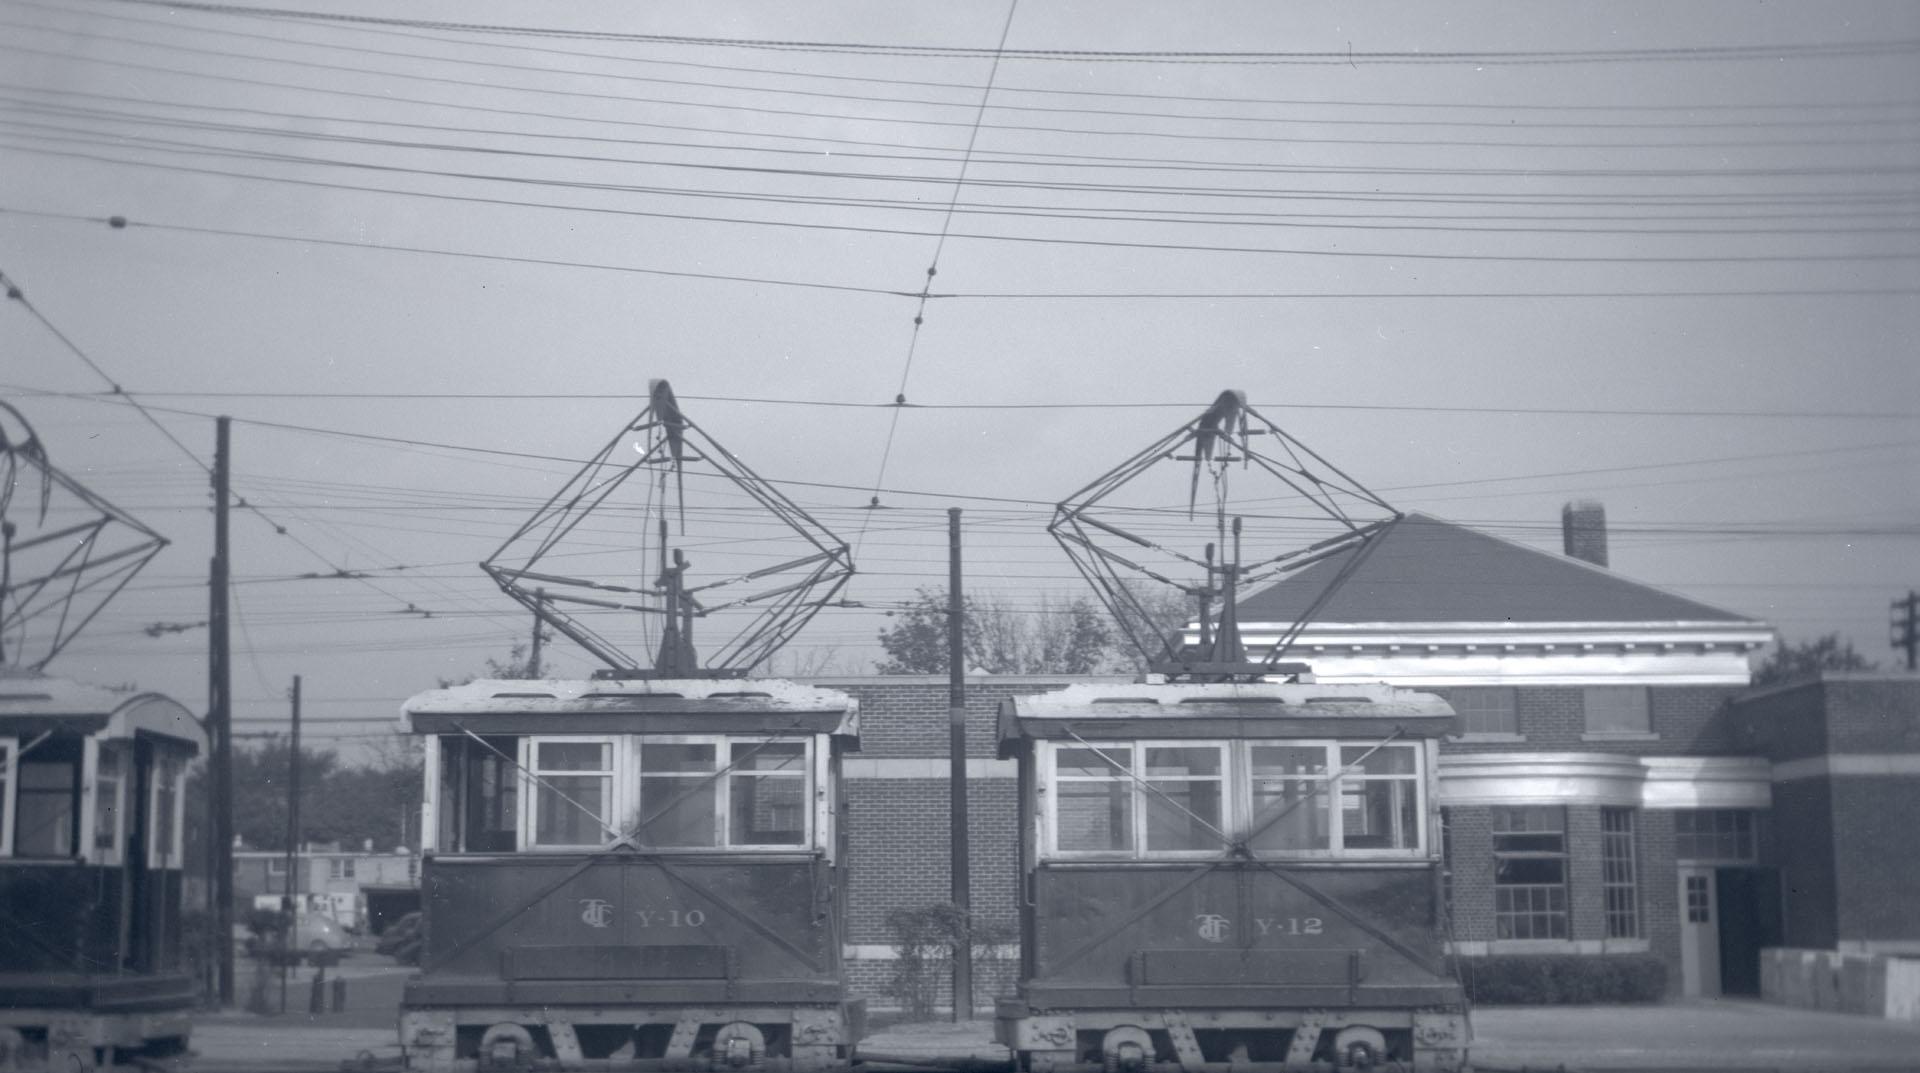 T.T.C., shunters at Eglinton carhouse. Image shows three work cars.